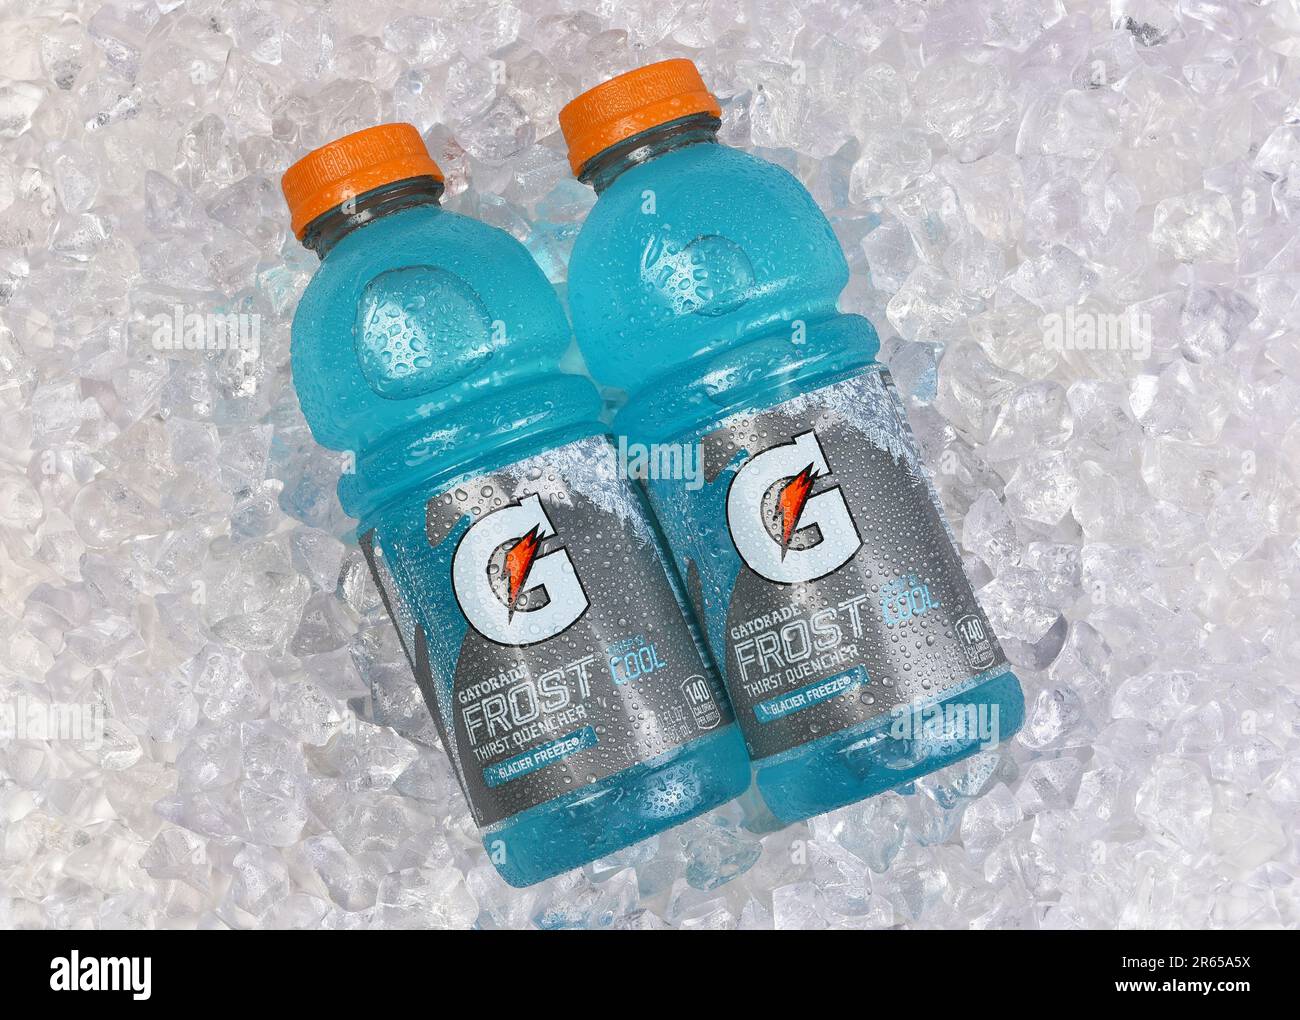 IRVINE, CALIFORNIA - 5 JUNE 2023: Two bottles of Gatorade Frost Glacier Freeze Thirst Quencher on ice. Stock Photo